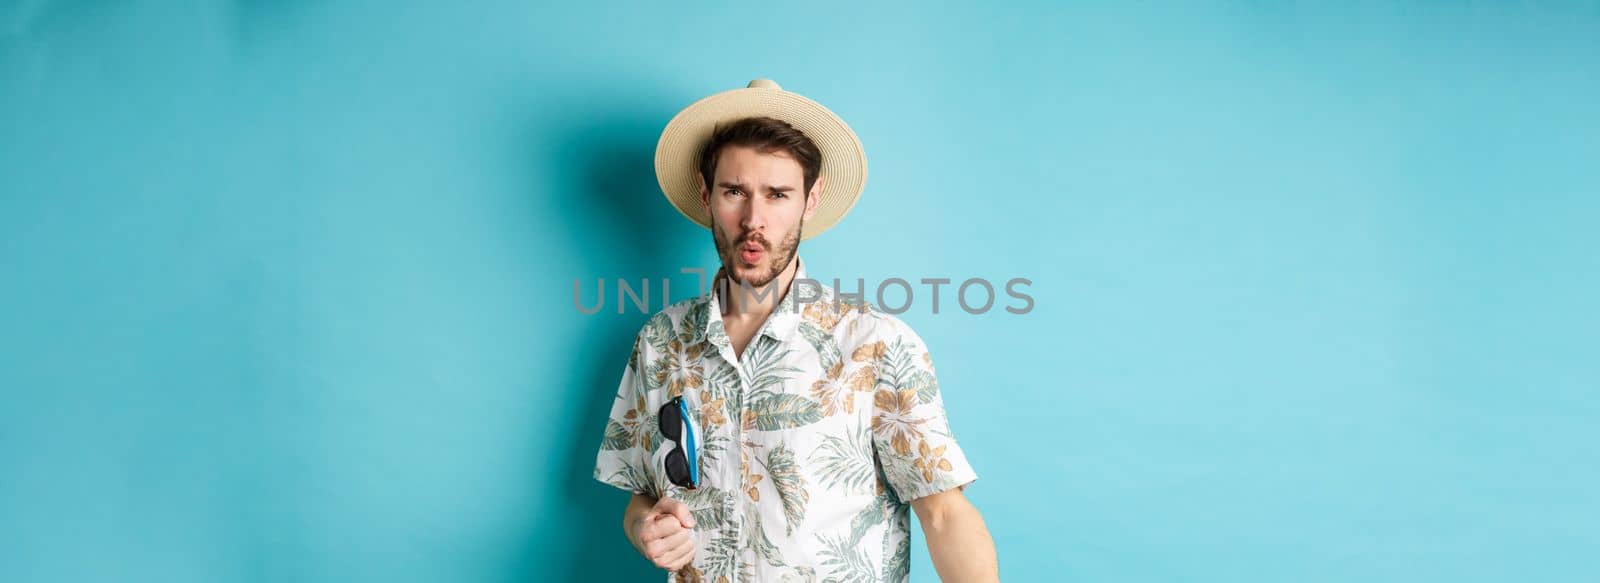 Happy tourist in hawaiian shirt and summer hat dancing, having fun on vacation, standing on blue background.